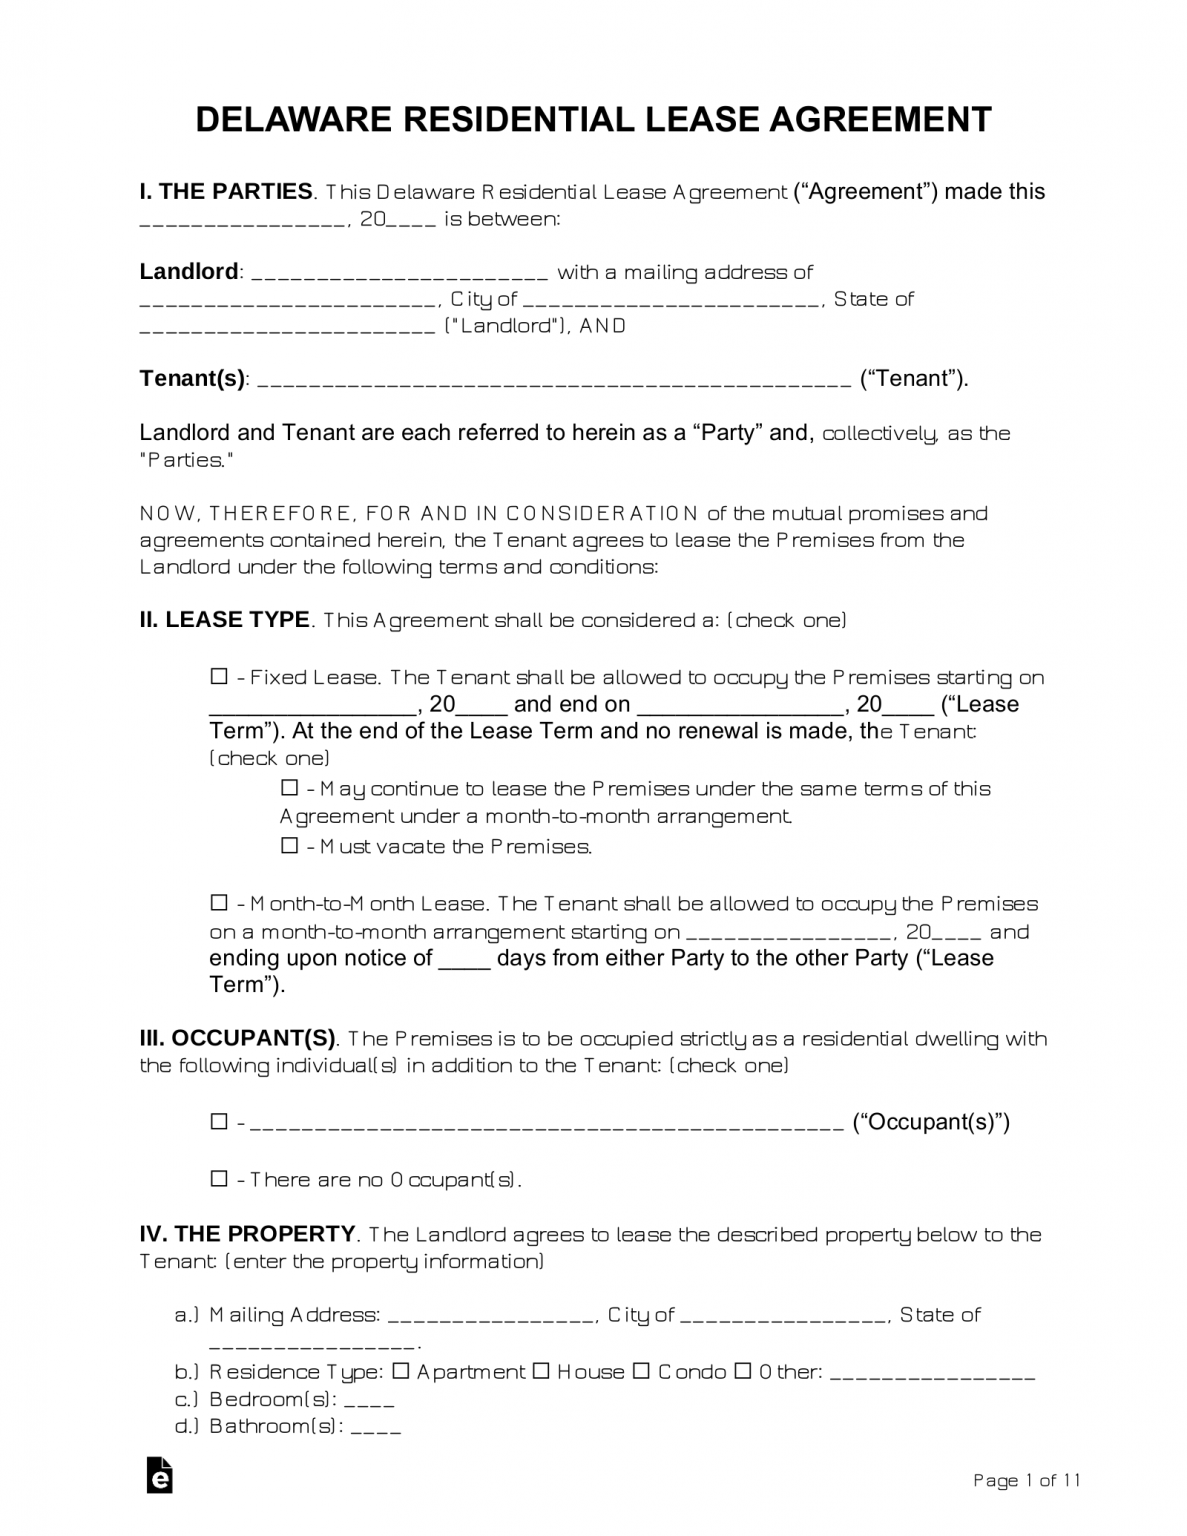 Free Delaware Lease Agreement Templates (6) PDF Word eForms